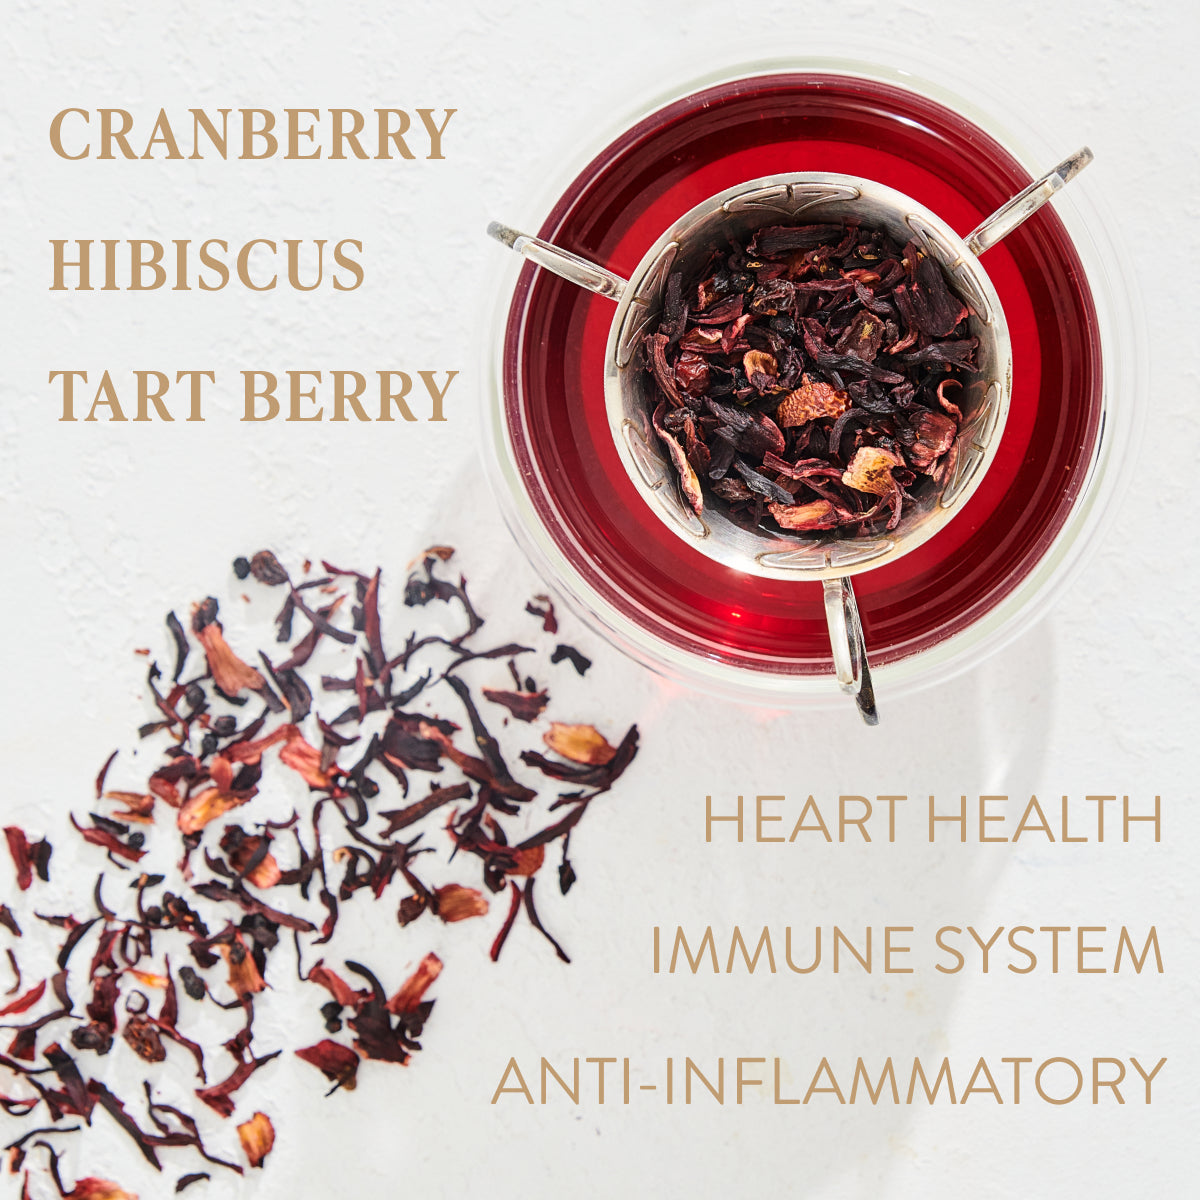 Overhead view of a glass of deep red tea with loose hibiscus and tart berry ingredients alongside it. The text reads &quot;Cranberry Hibiscus Tart Berry&quot; on the left and &quot;Heart Health Immune System Anti-Inflammatory&quot; on the right. Experience Ruby Moon™ : Hibiscus Elderberry Tea, a delightful Organic Loose Leaf blend for optimal wellness by Club Magic Hour.